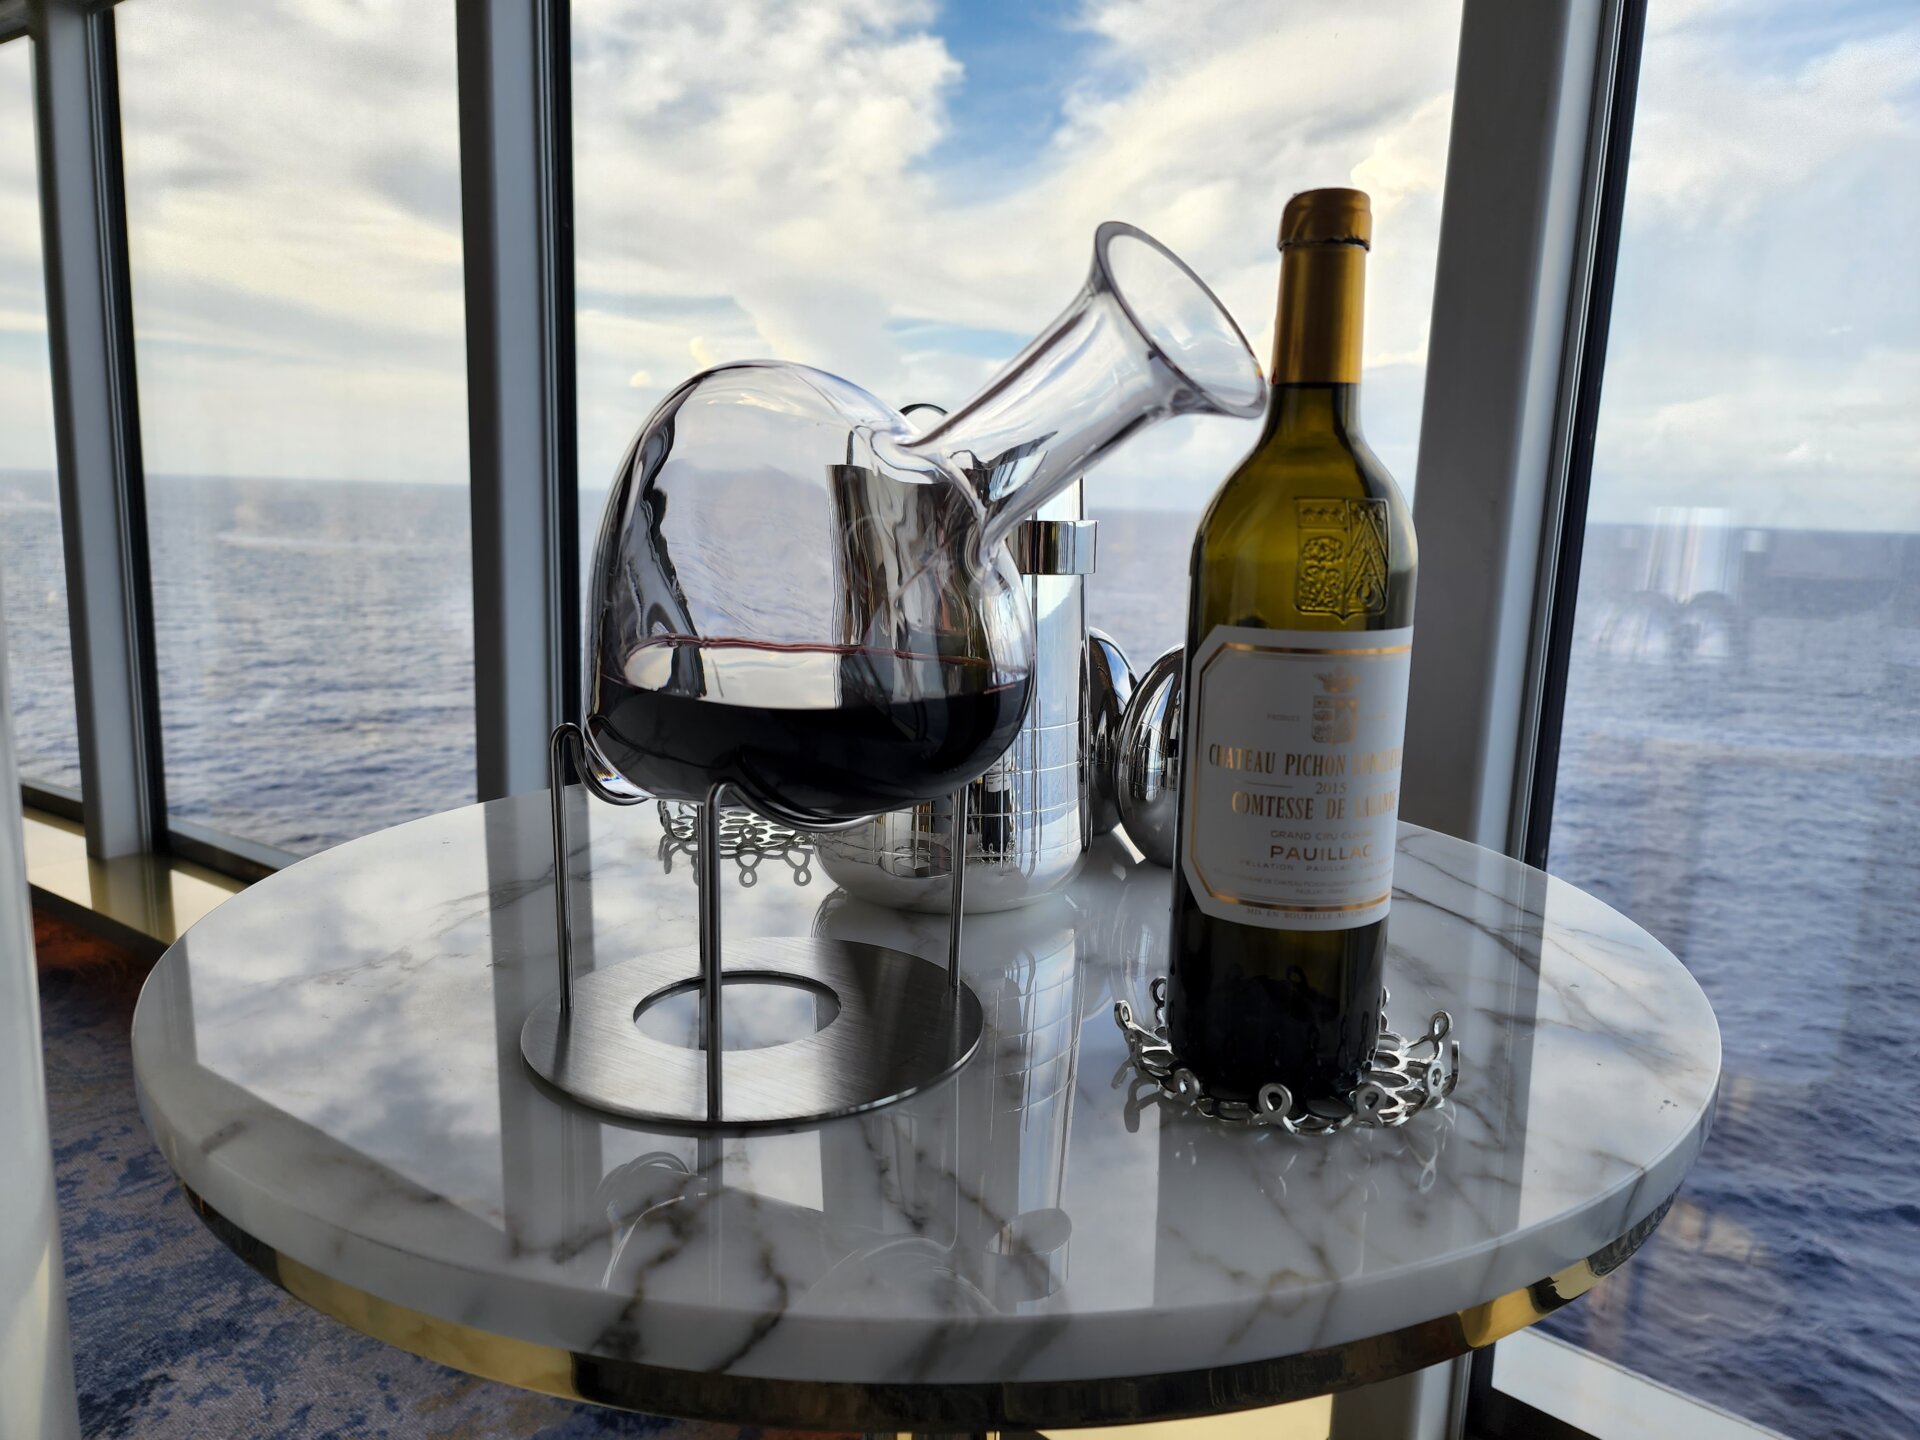 photo taken on board a Disney Cruise Line ship, of a bottle of red wine next to a glass decantur containing some of the wine, with a view of the ocean behind it.